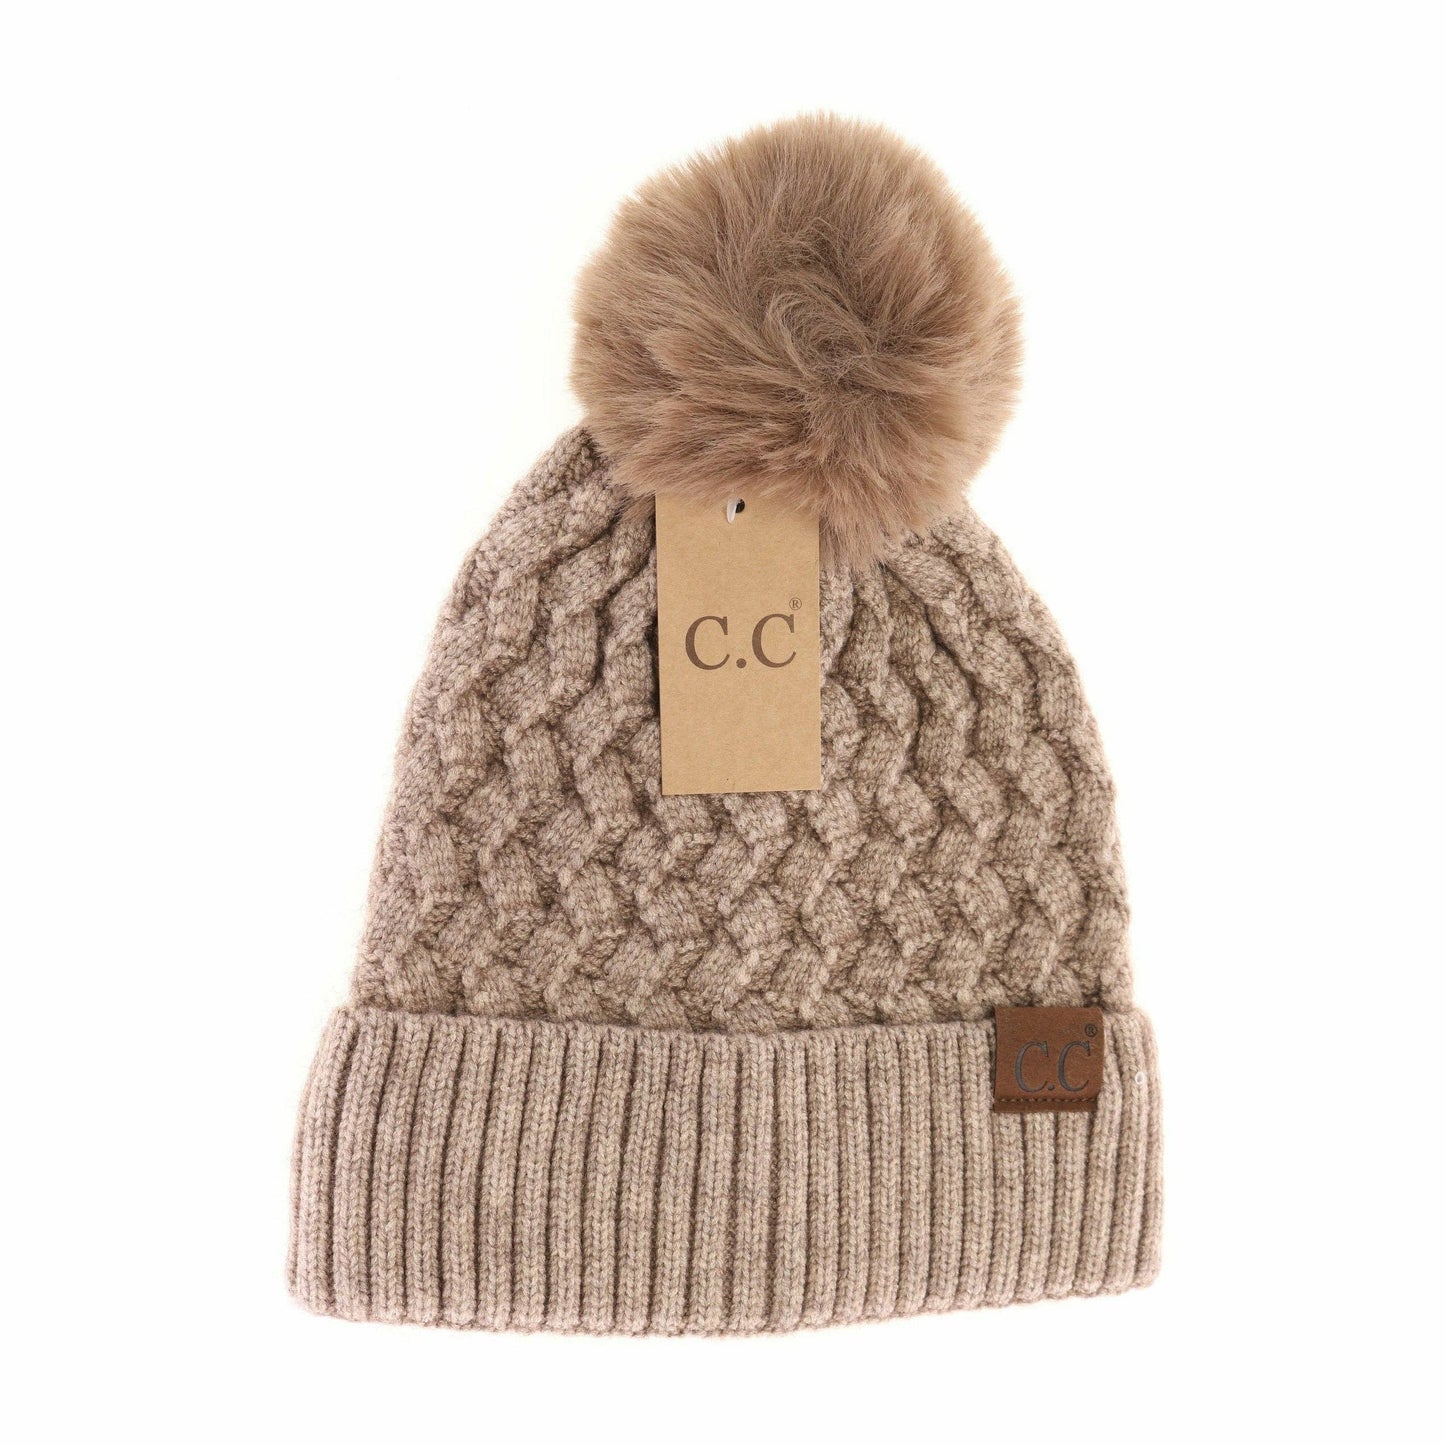 Woven Cable Knit Cuffed Matching Fur Pom: Taupe